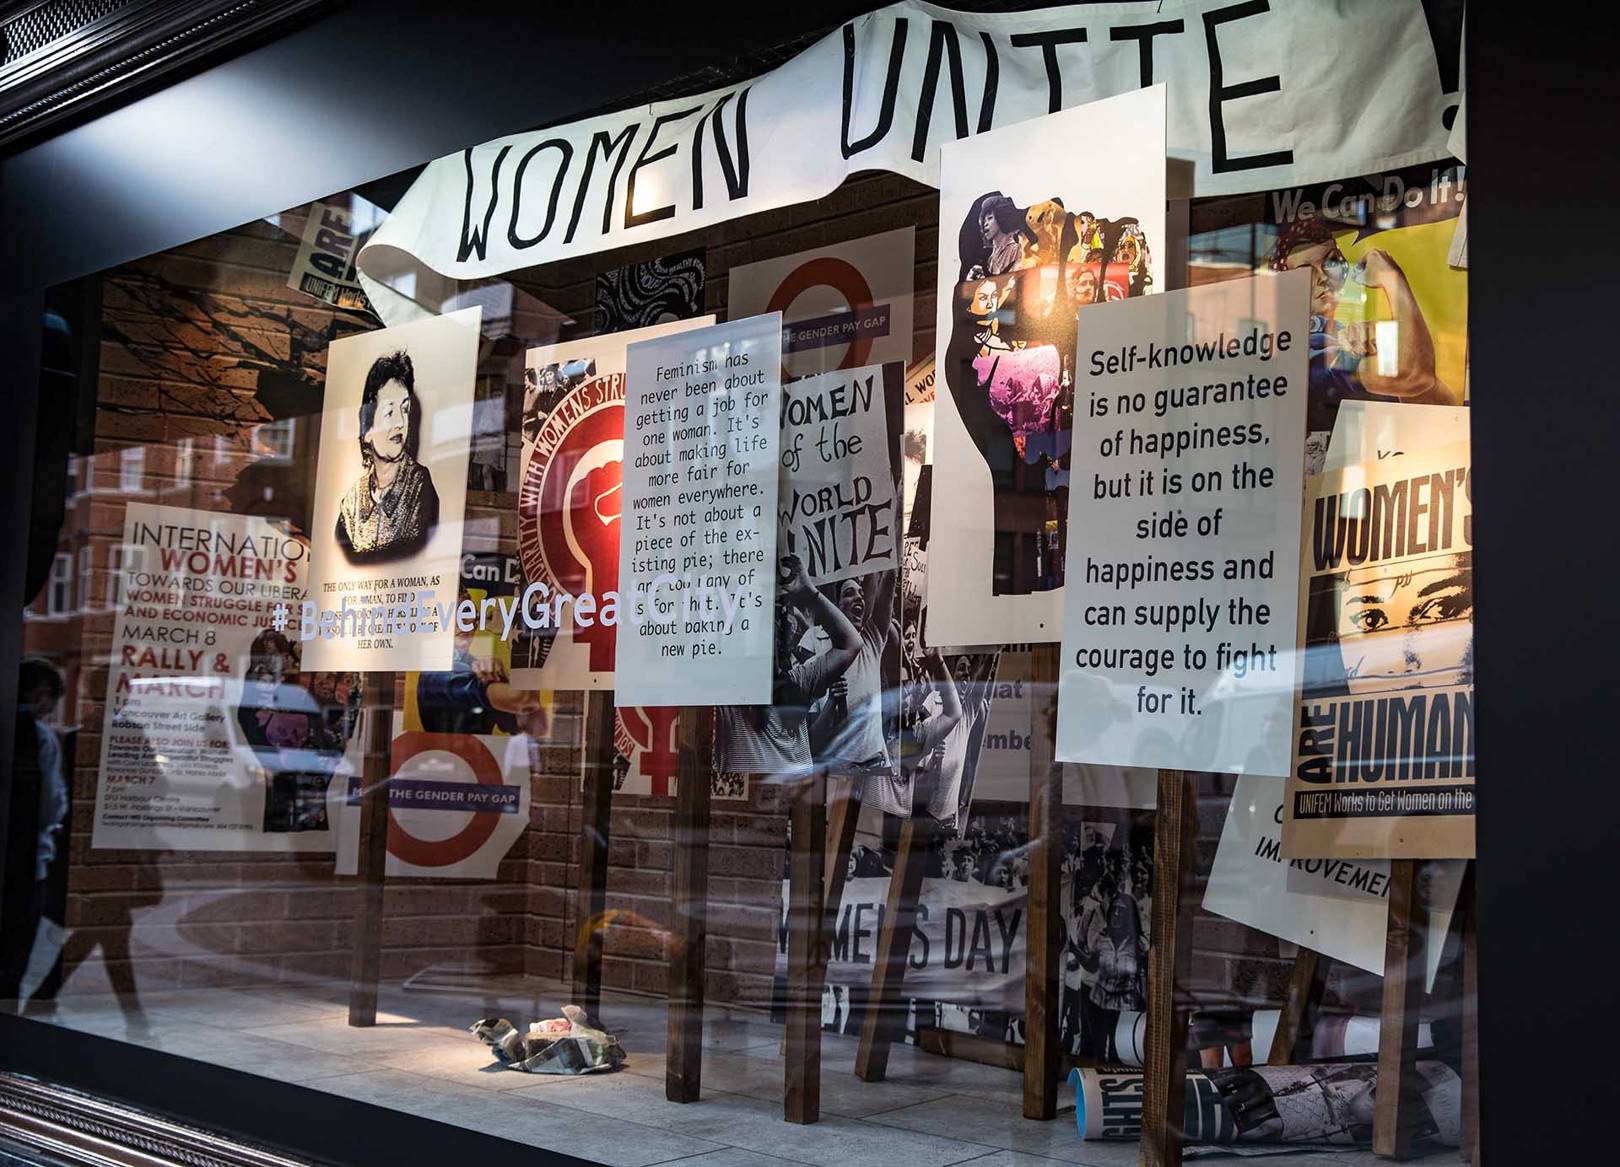 London Department Stores "Smash" Their Windows In The Name Of Women's Suffrage